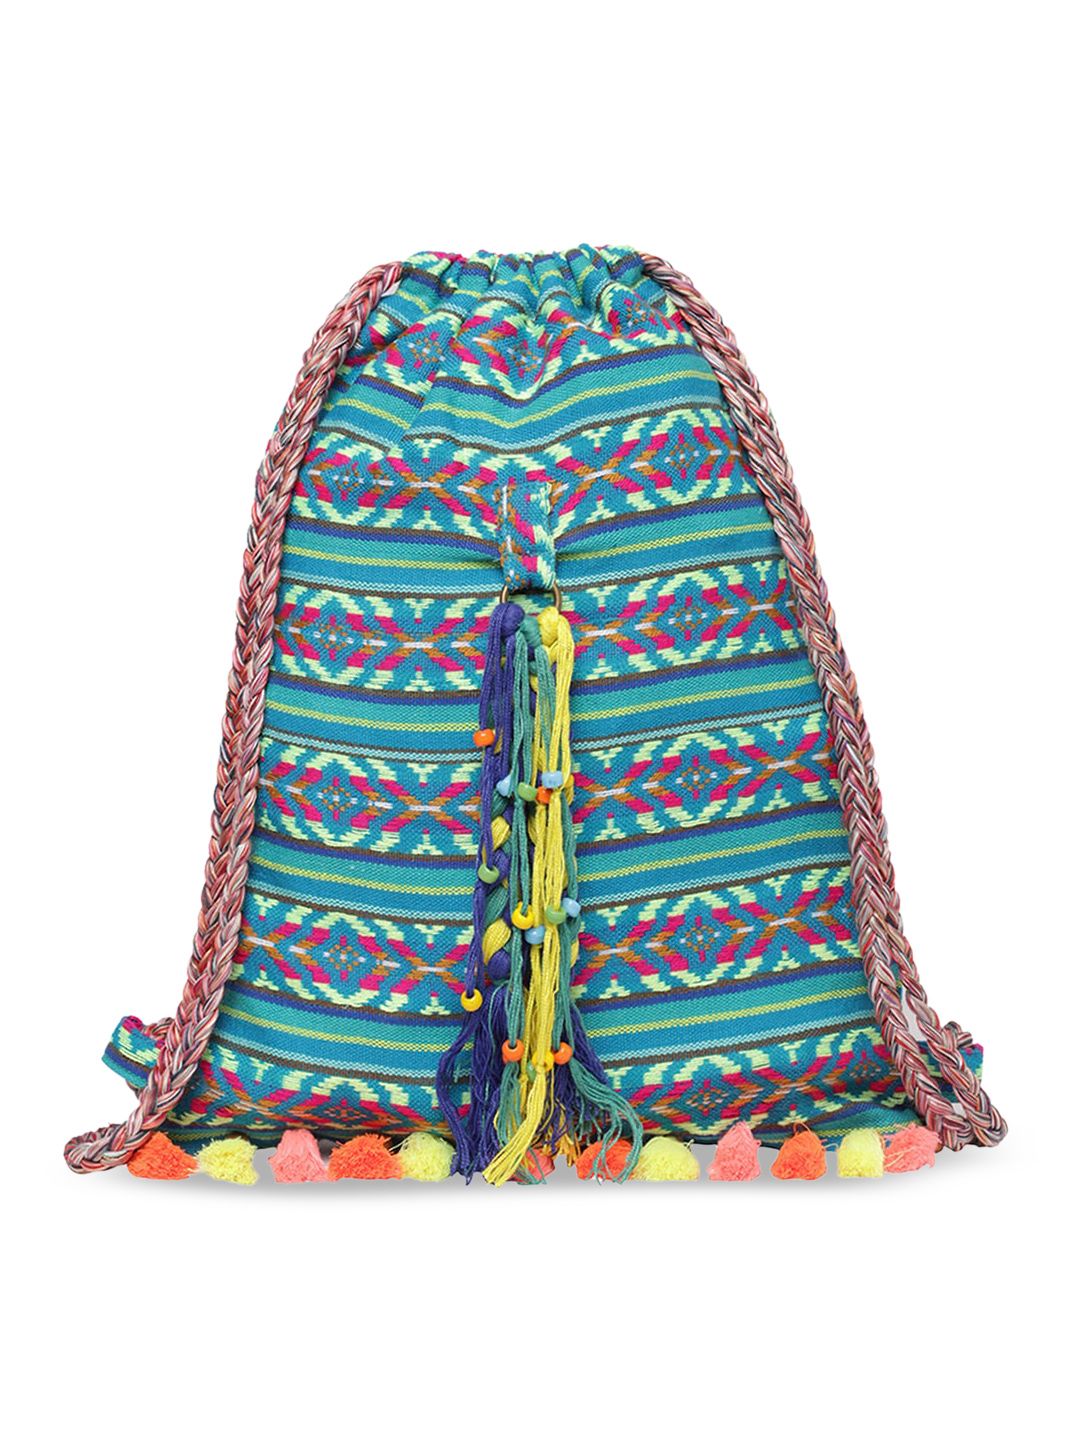 The House of Tara Women Teal & Yellow Tasselled Backpack Price in India